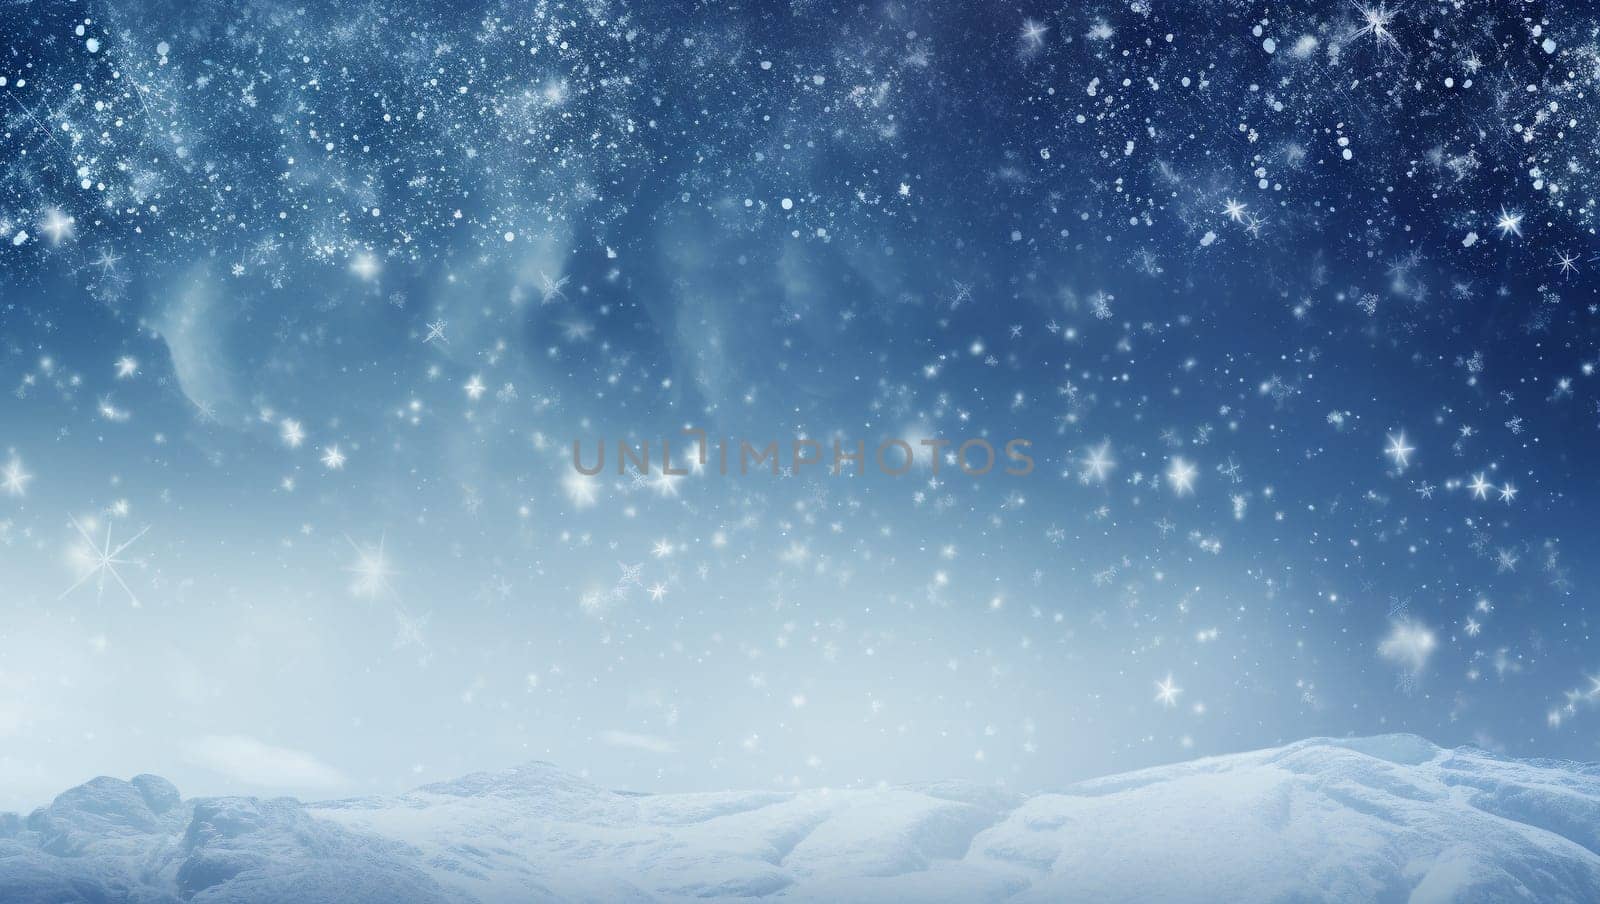 Snowy background. New Year's mood, christmas snowy background. Blue and white shimmer. Snowy hills and sky. High quality photo